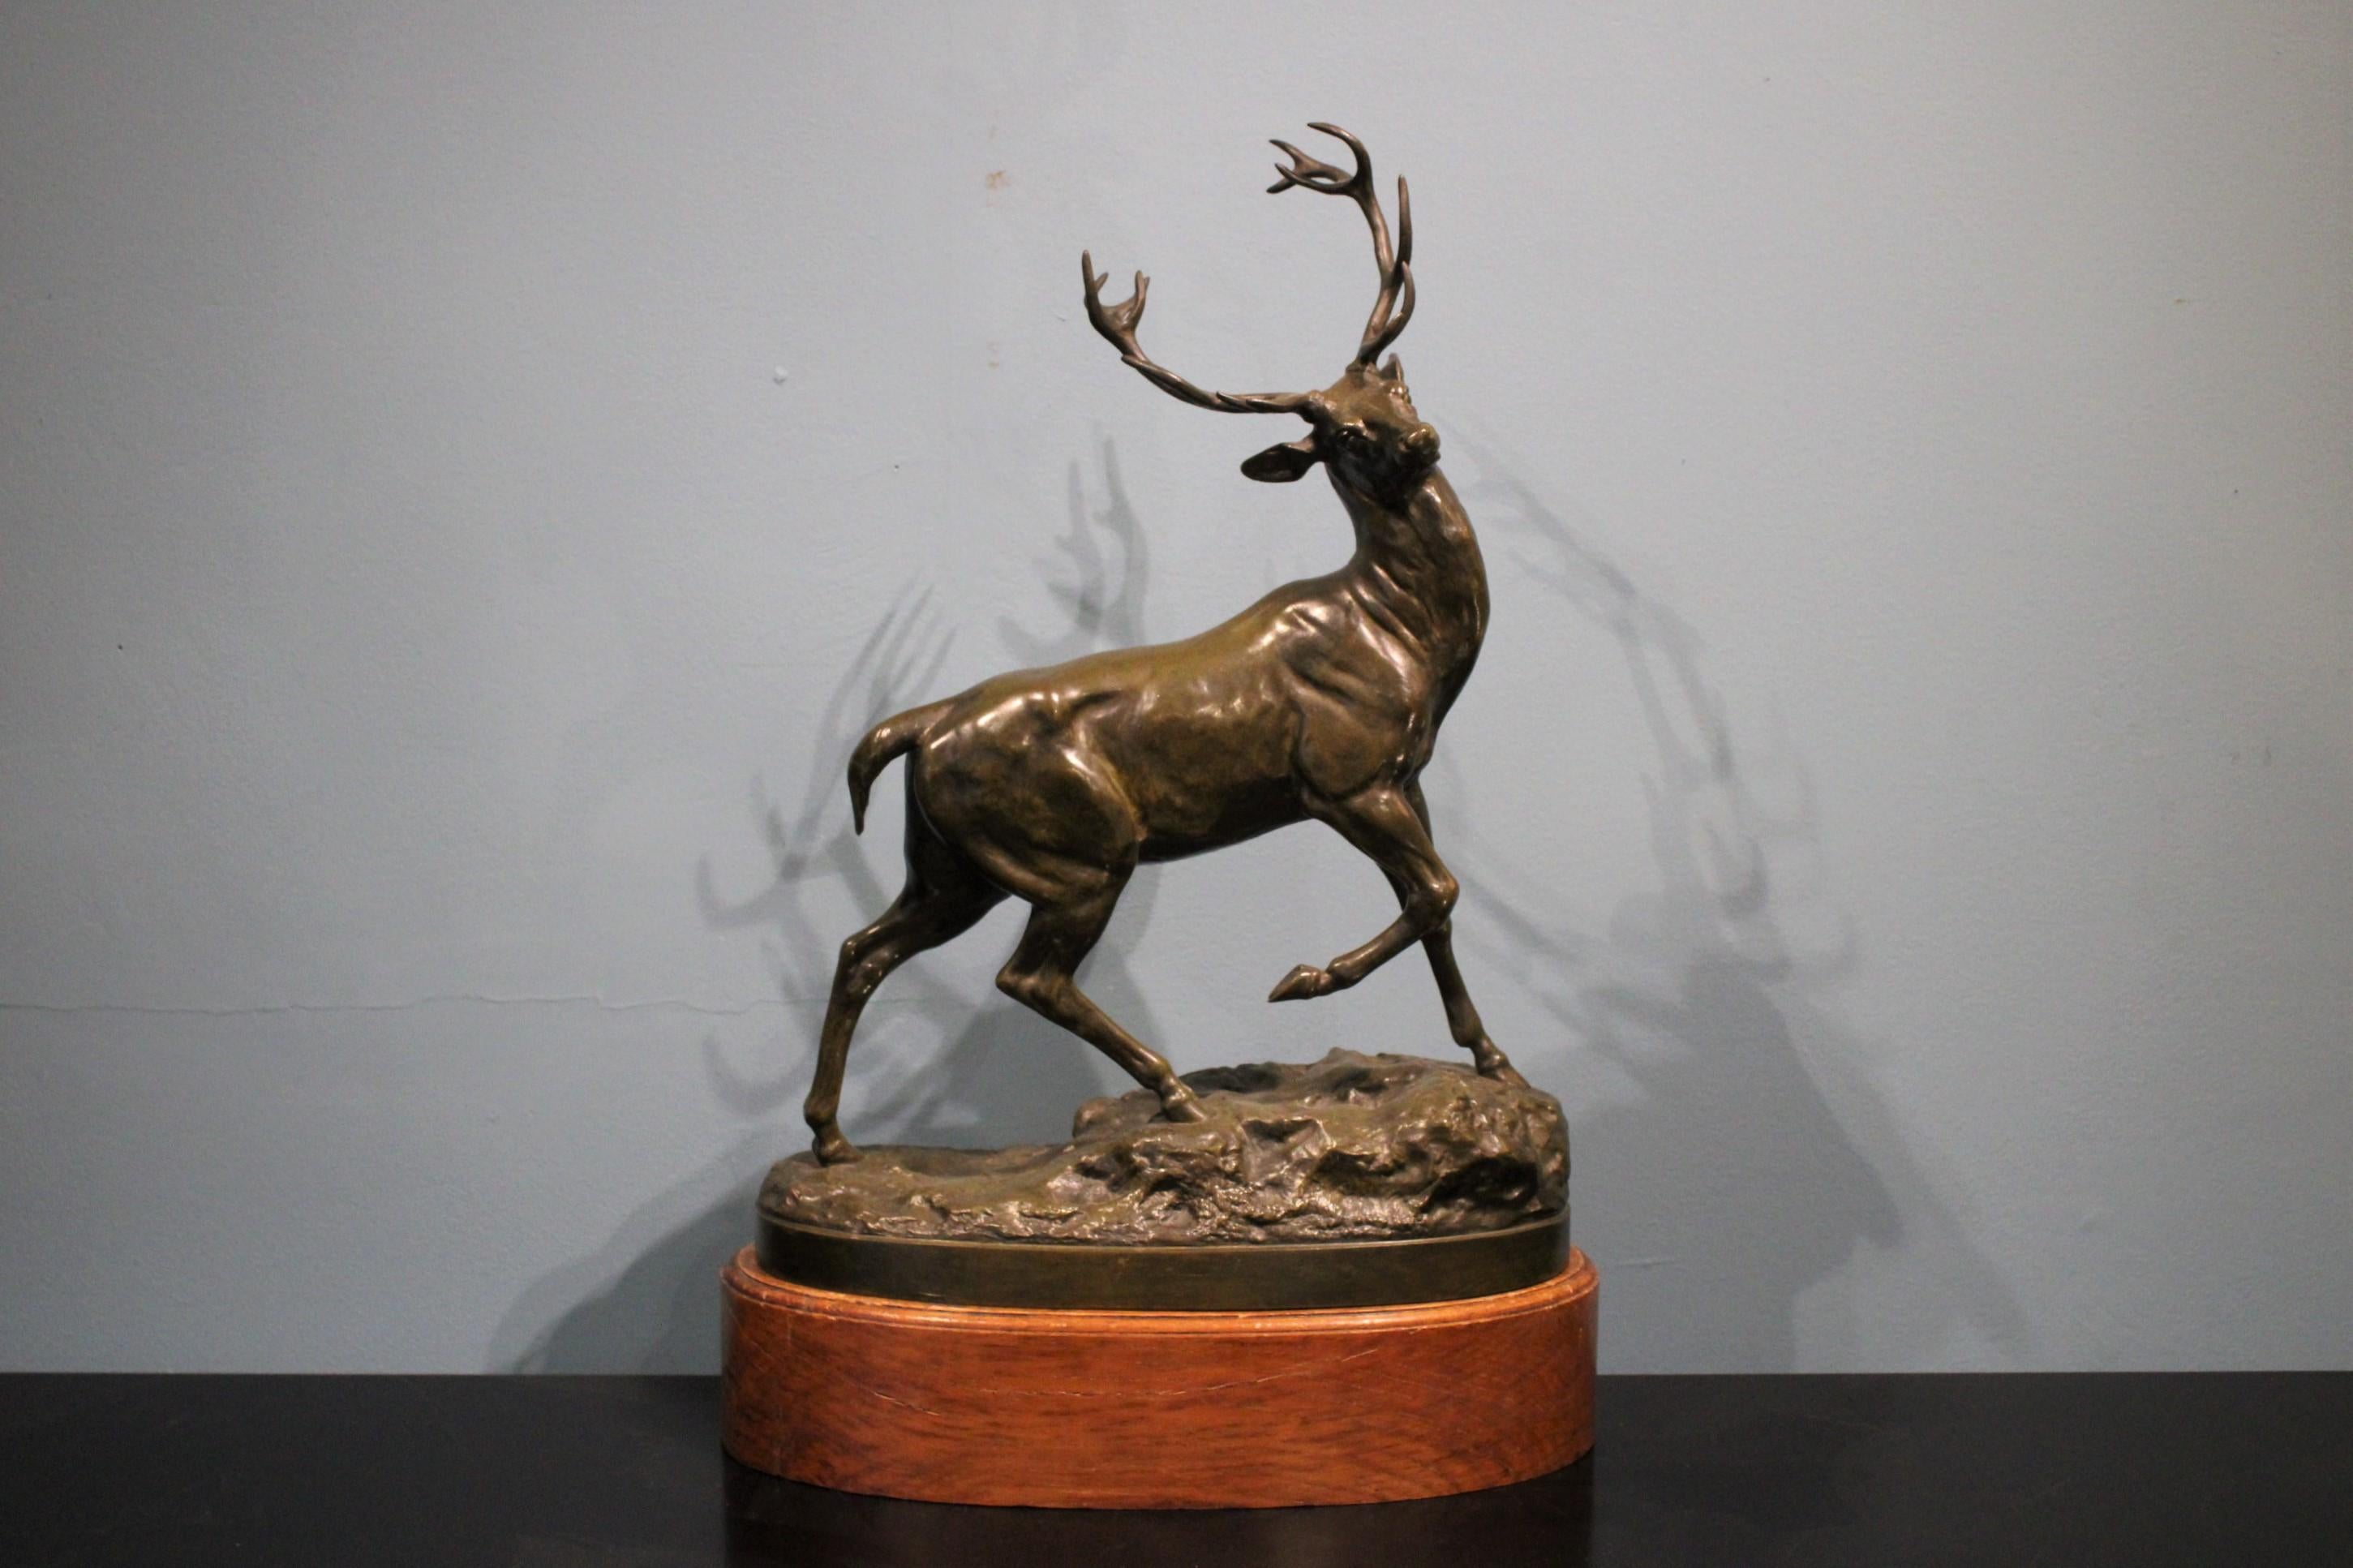 Stag bronze by Vidal Louis (French sculptor, 1831-1892)
Bronze with brown patina, signed.